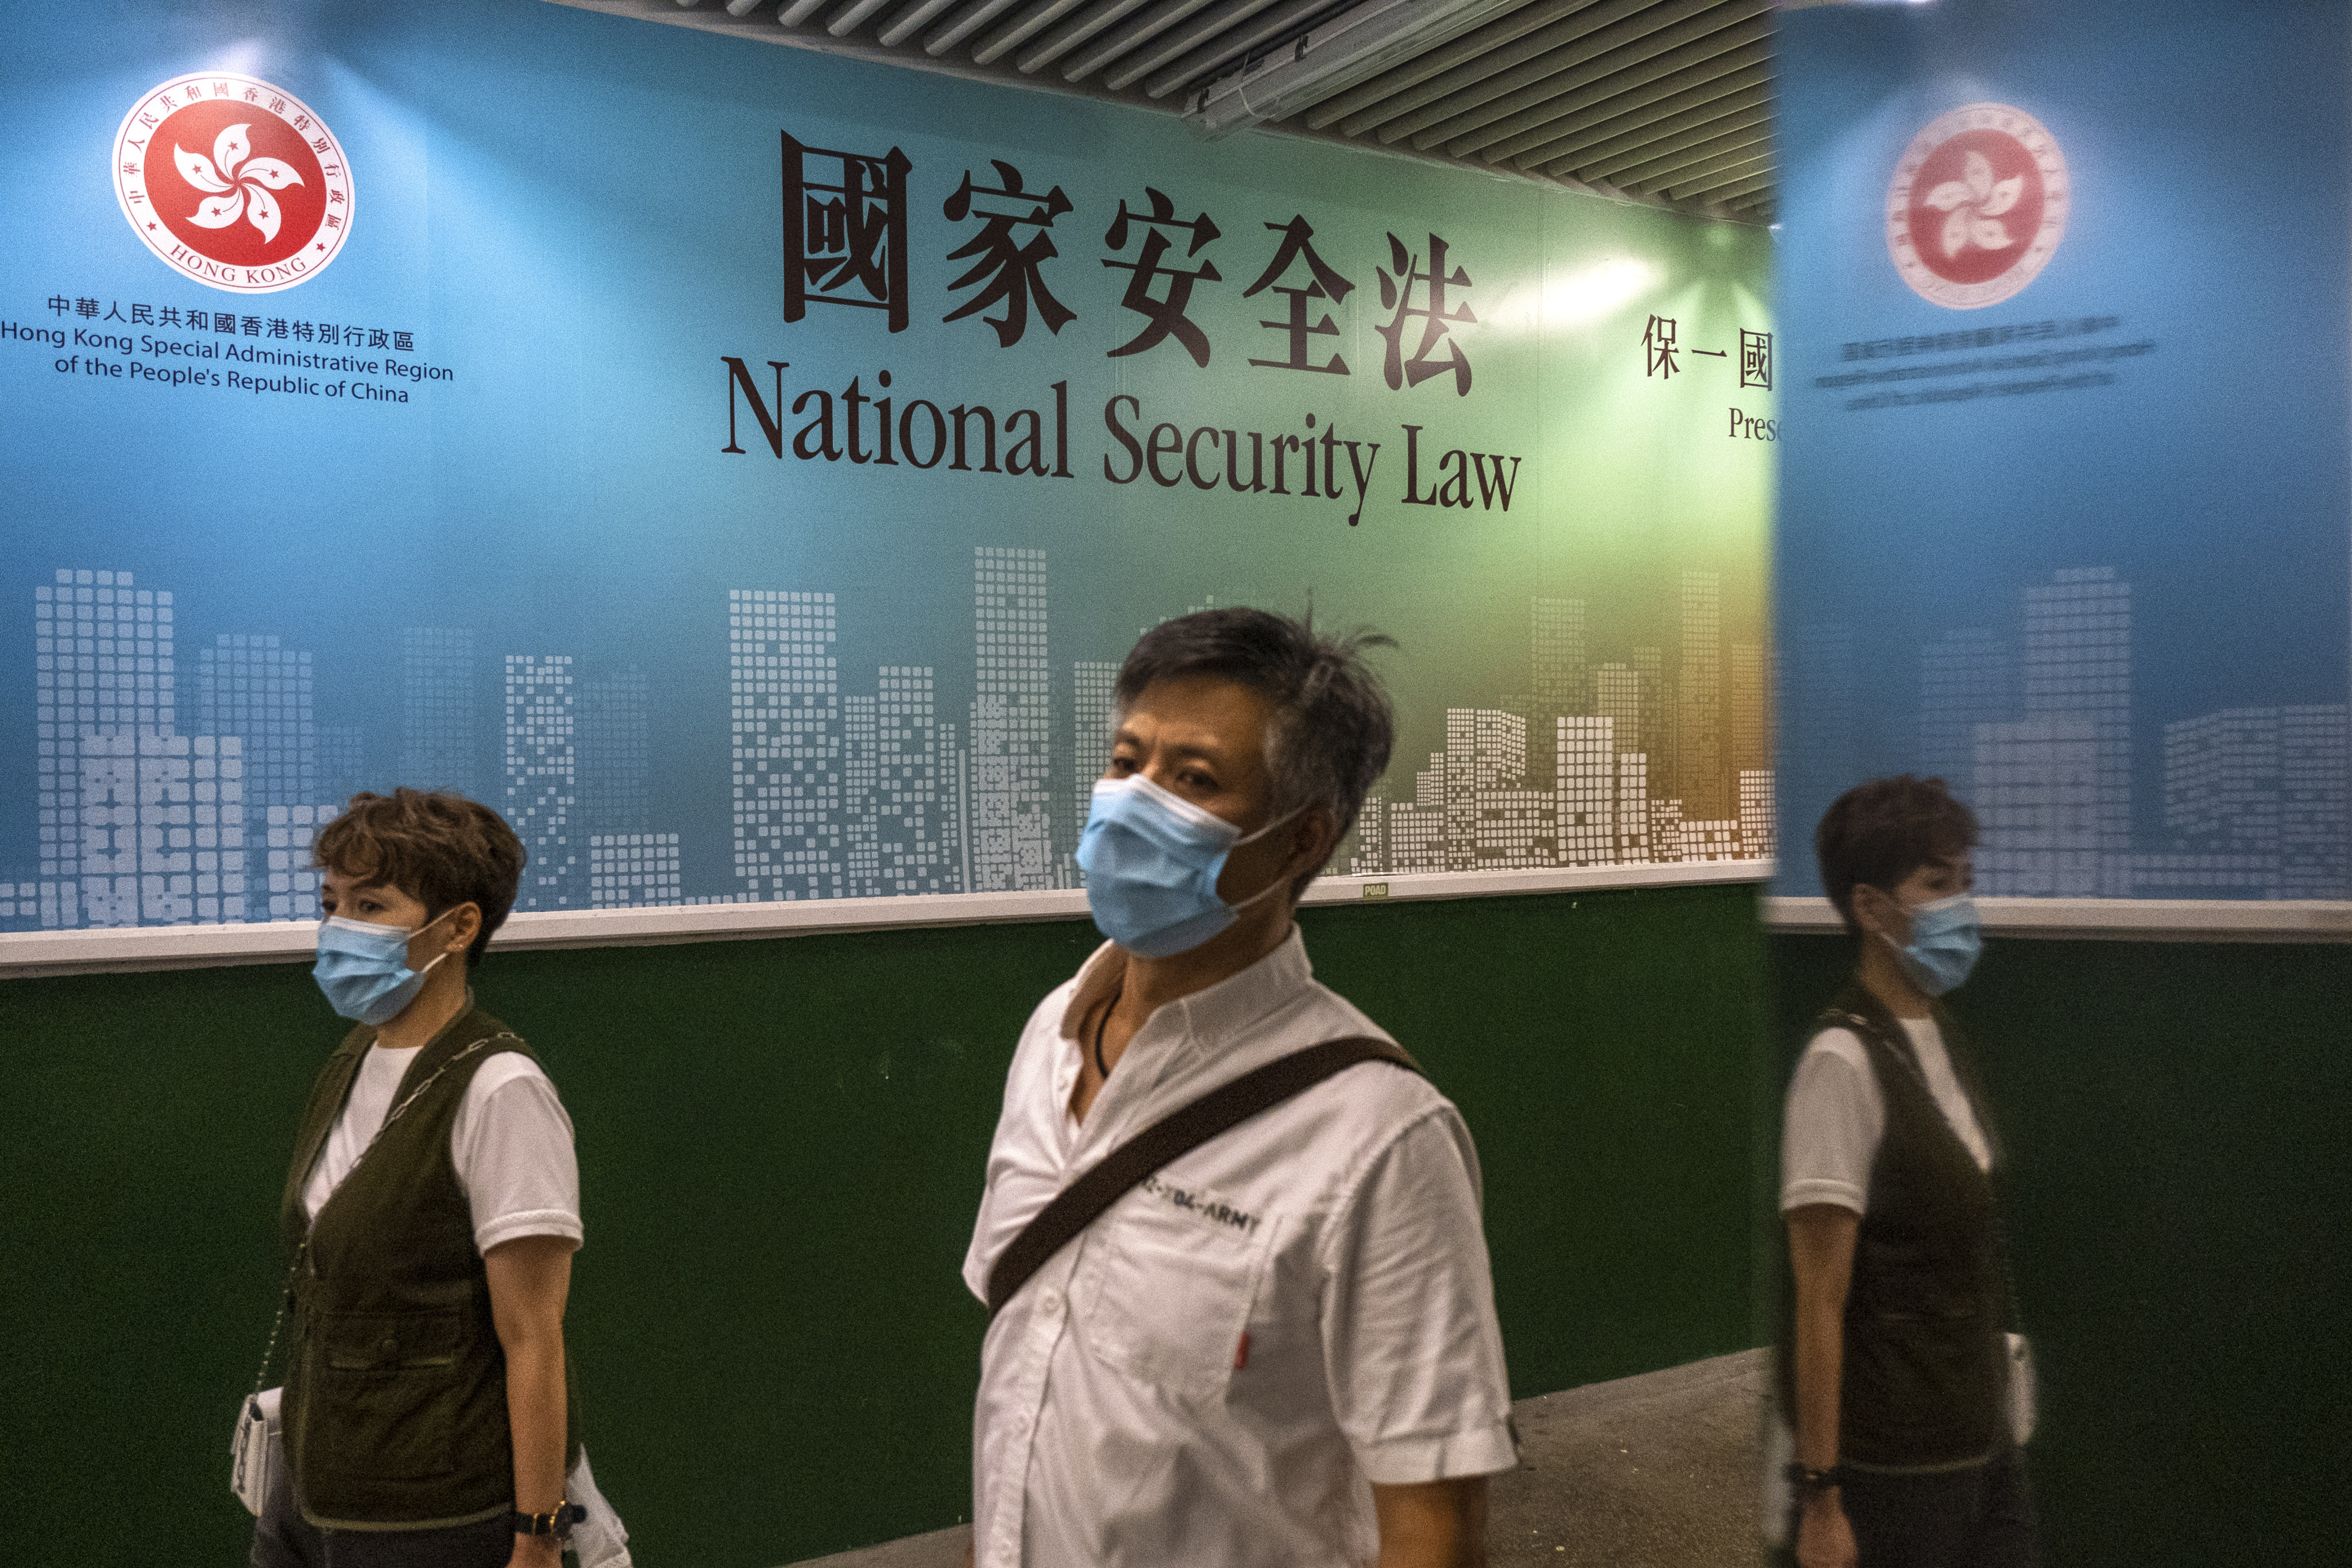 Britain says Hong Kong courts must “adjudicate on an opaque national security law that places the authority of the chief executive on security matters above that of their own”. Photo: Sun Yeung